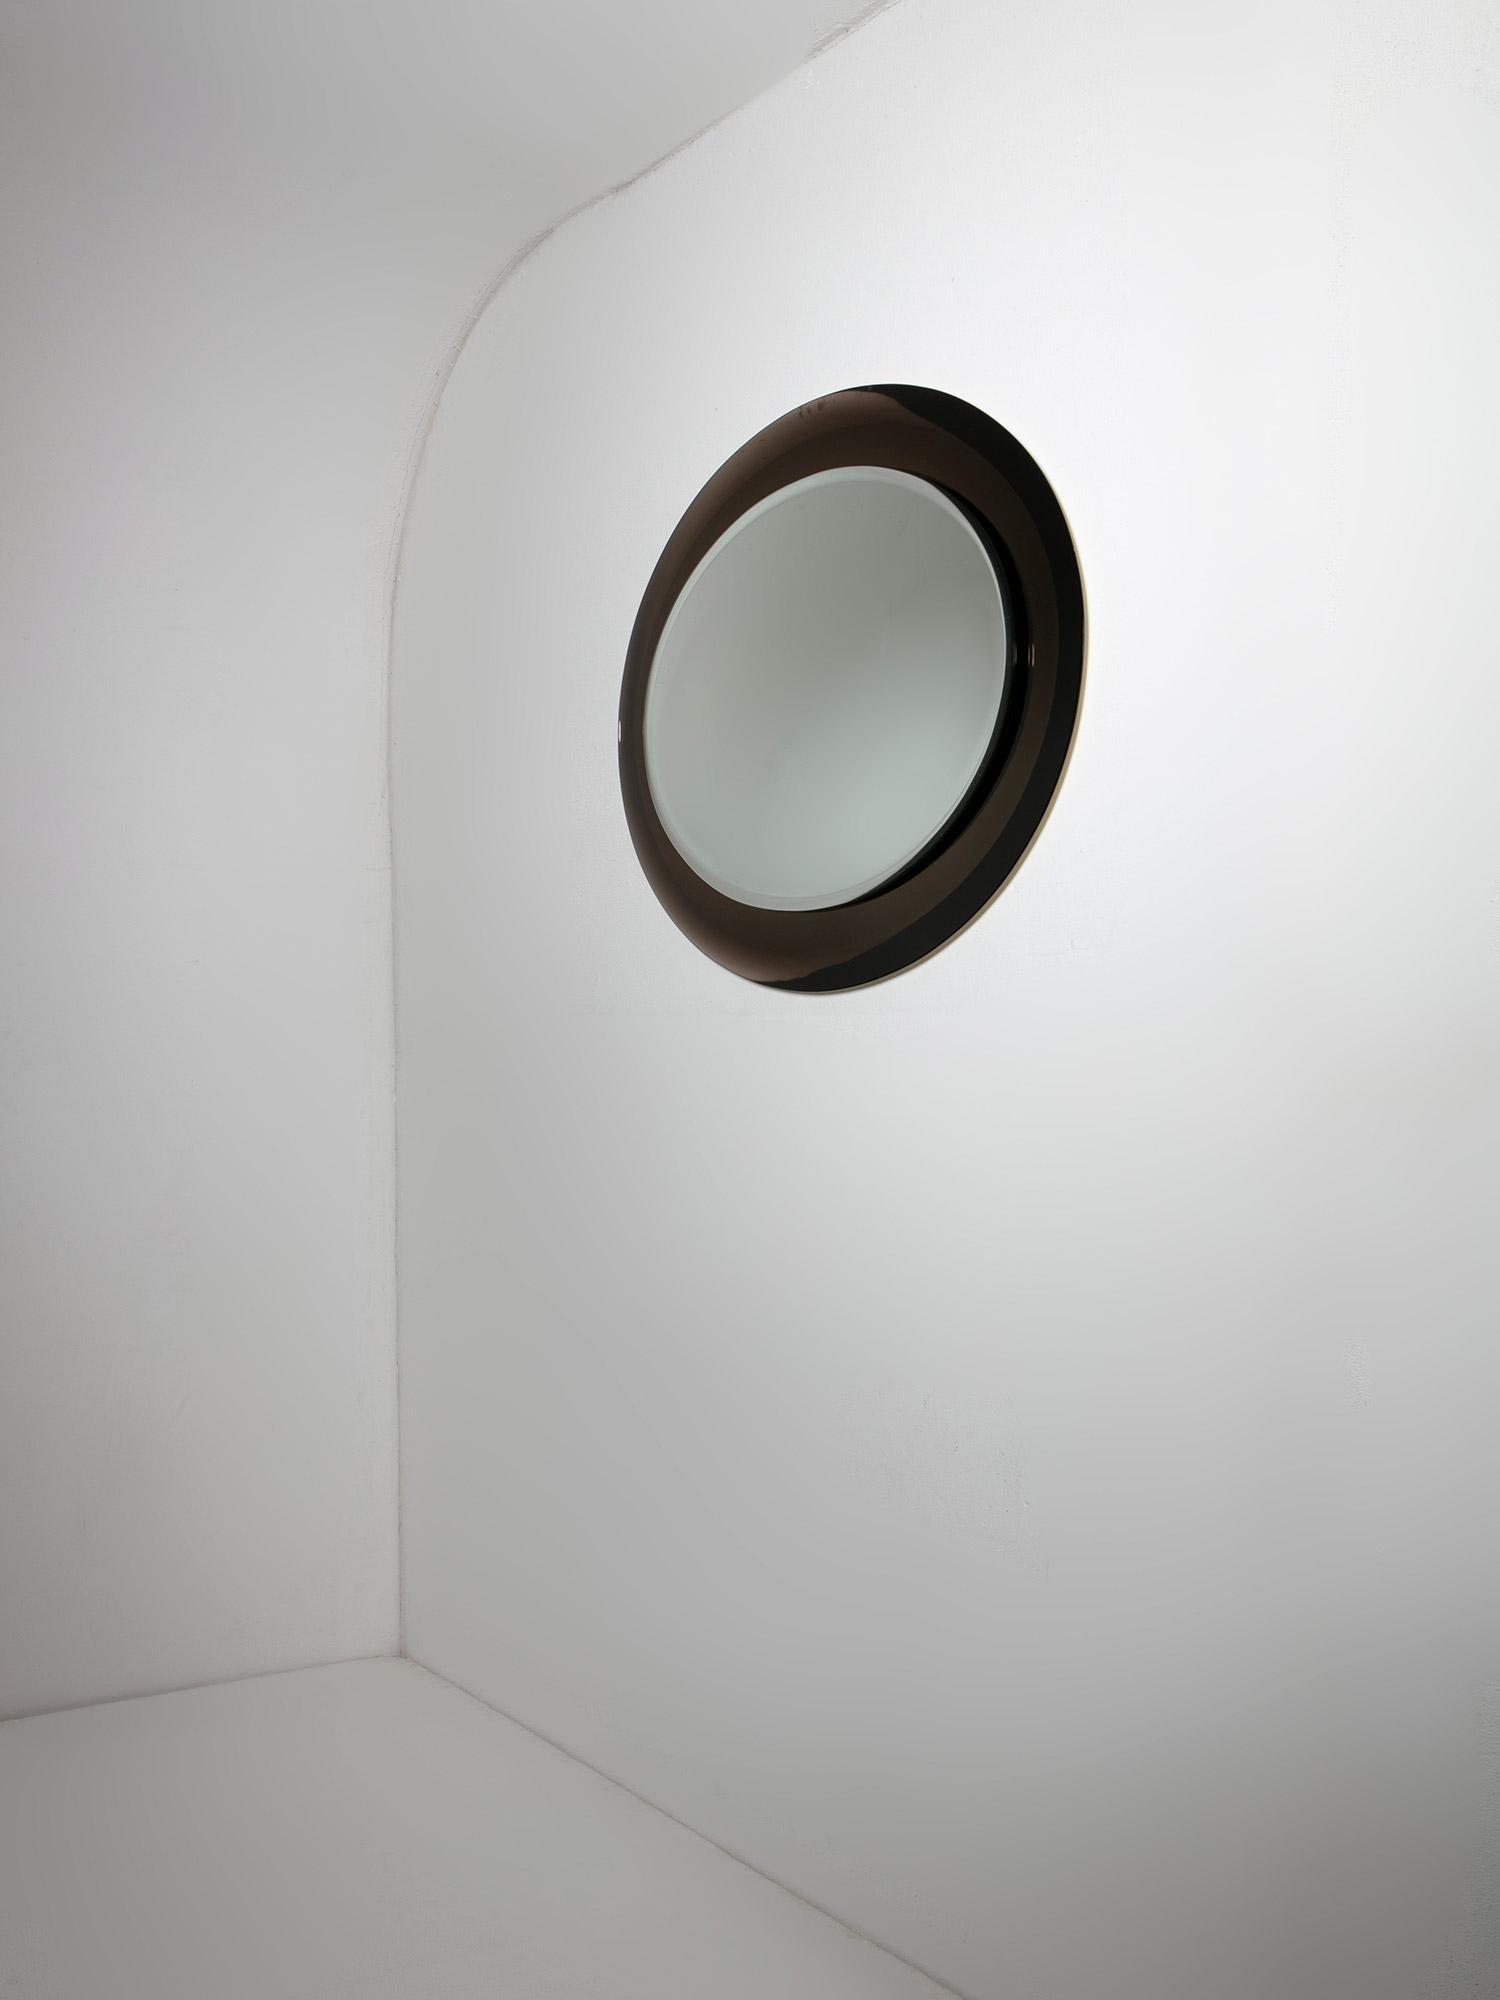 Large Double Bevelled Oval Wall Mirror, Metalvetro Galvorame, Italy, 1970s In Fair Condition For Sale In Milan, IT